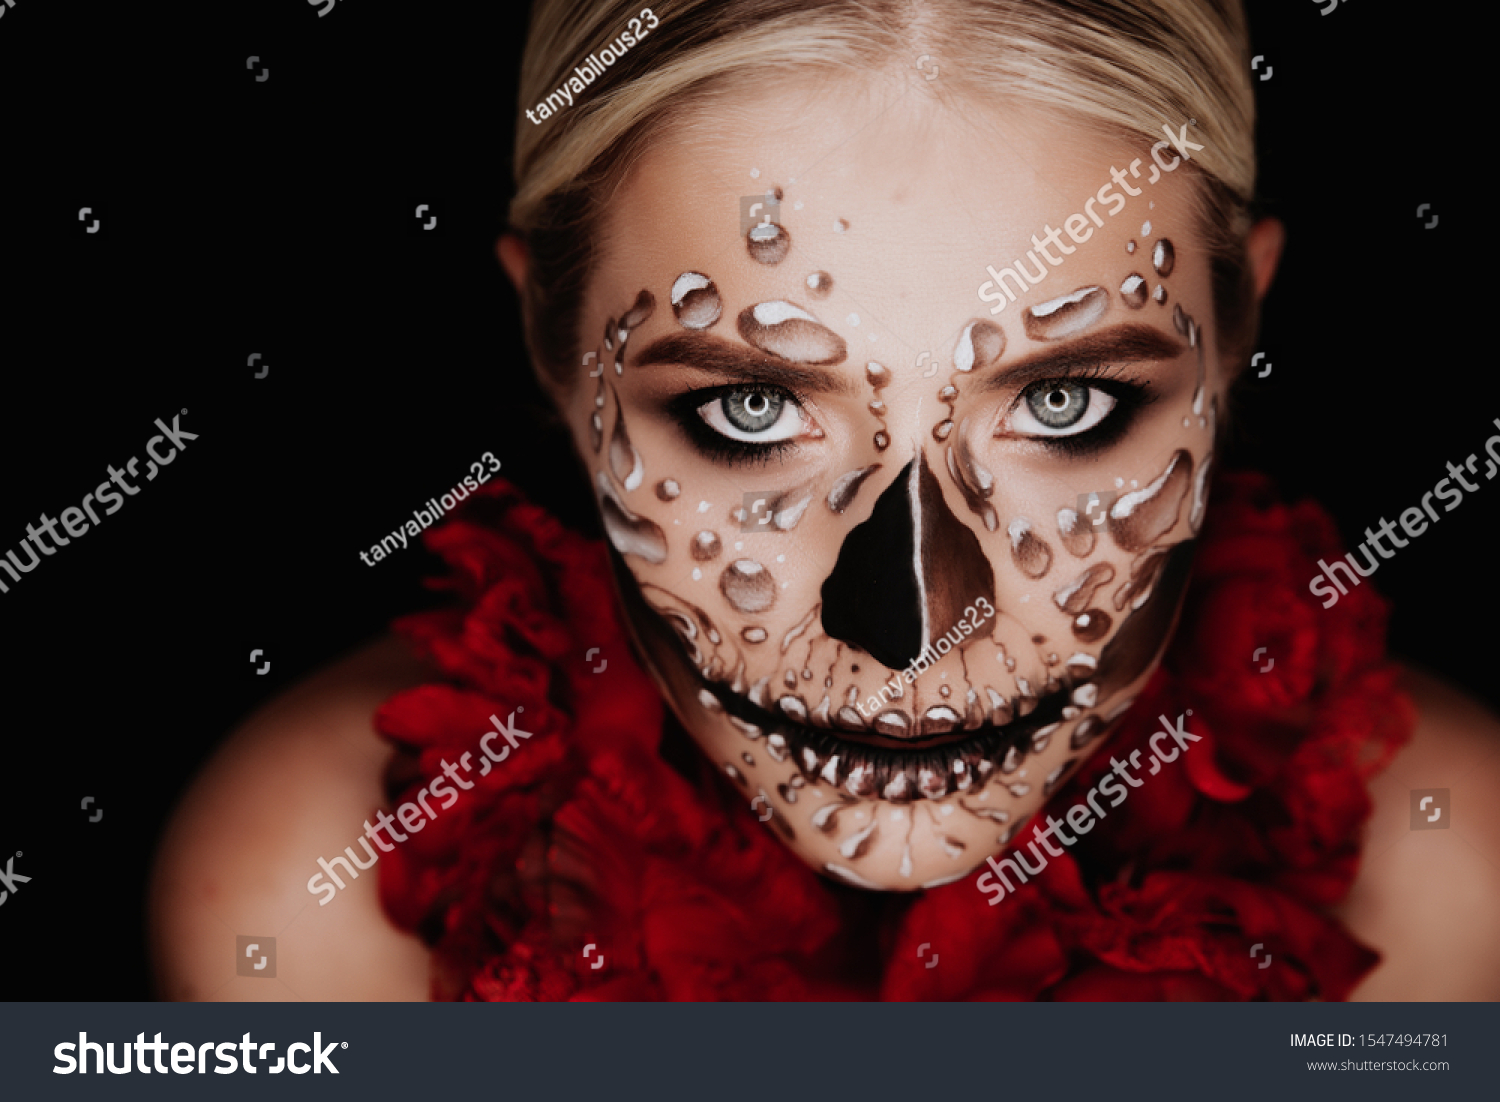 Portrait of a woman with sugar skull makeup over red background. Halloween costume and make-up.  #1547494781